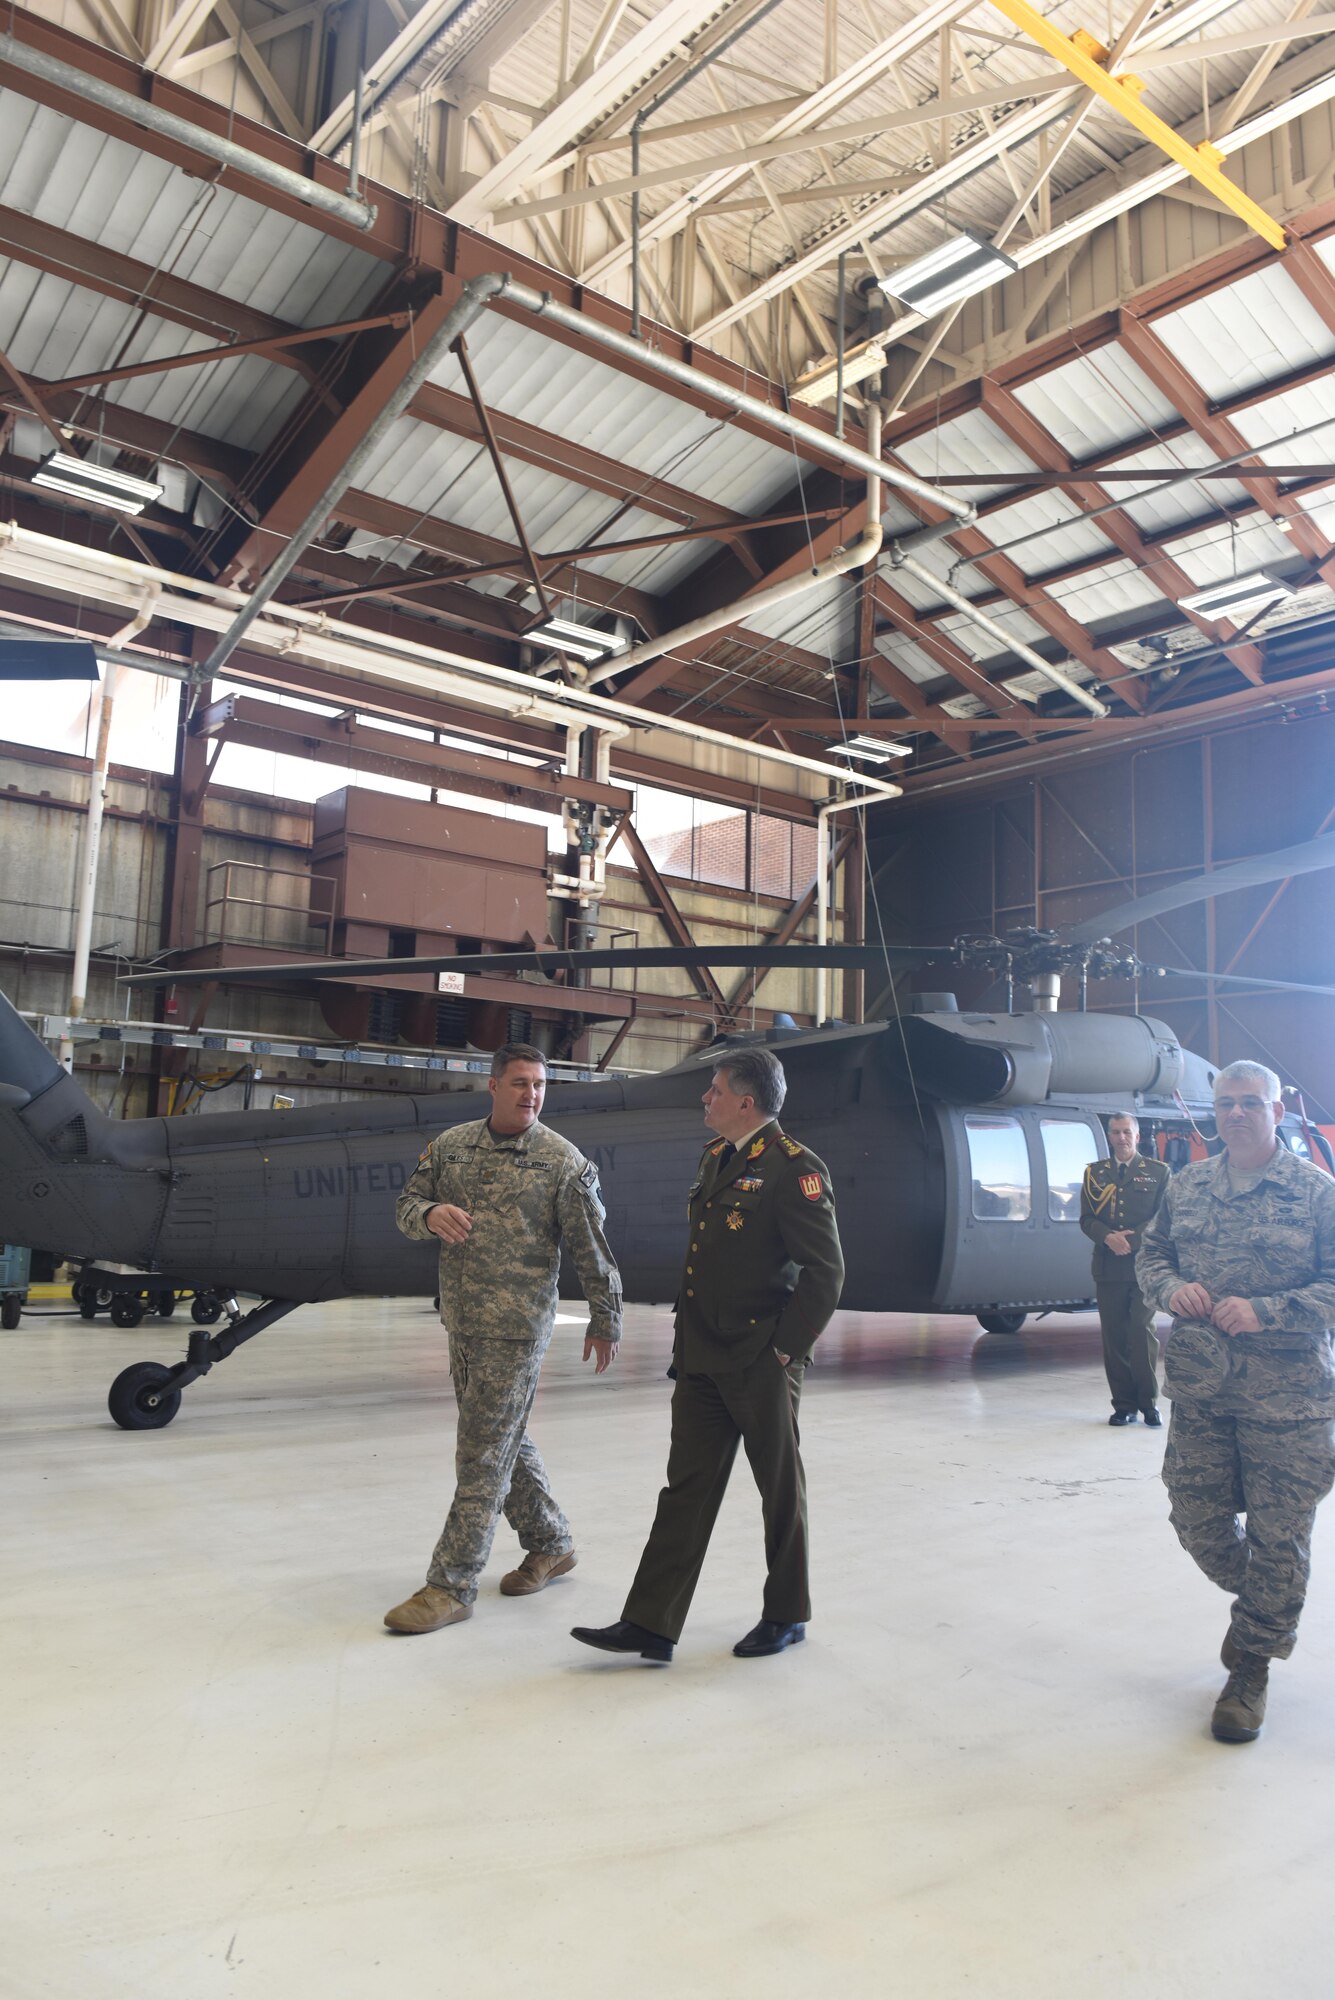 Maj. George Files (left), Army aviation support facility No. 1 maintenance officer, Pennsylvania Army National Guard, leads Lt. Gen. Jonas Vytautas Zukas, chief of defense of Lithuania, through a tour Oct. 15 of one of the aircraft hangars at Muir Army Airfield, Fort Indiantown Gap, Annville, Pa. The PANG and Lithuanian officials spent the day fostering a state-country partnership that began in 1993. (U.S. Air National Guard photo by Tech. Sgt. Claire Behney/Released)